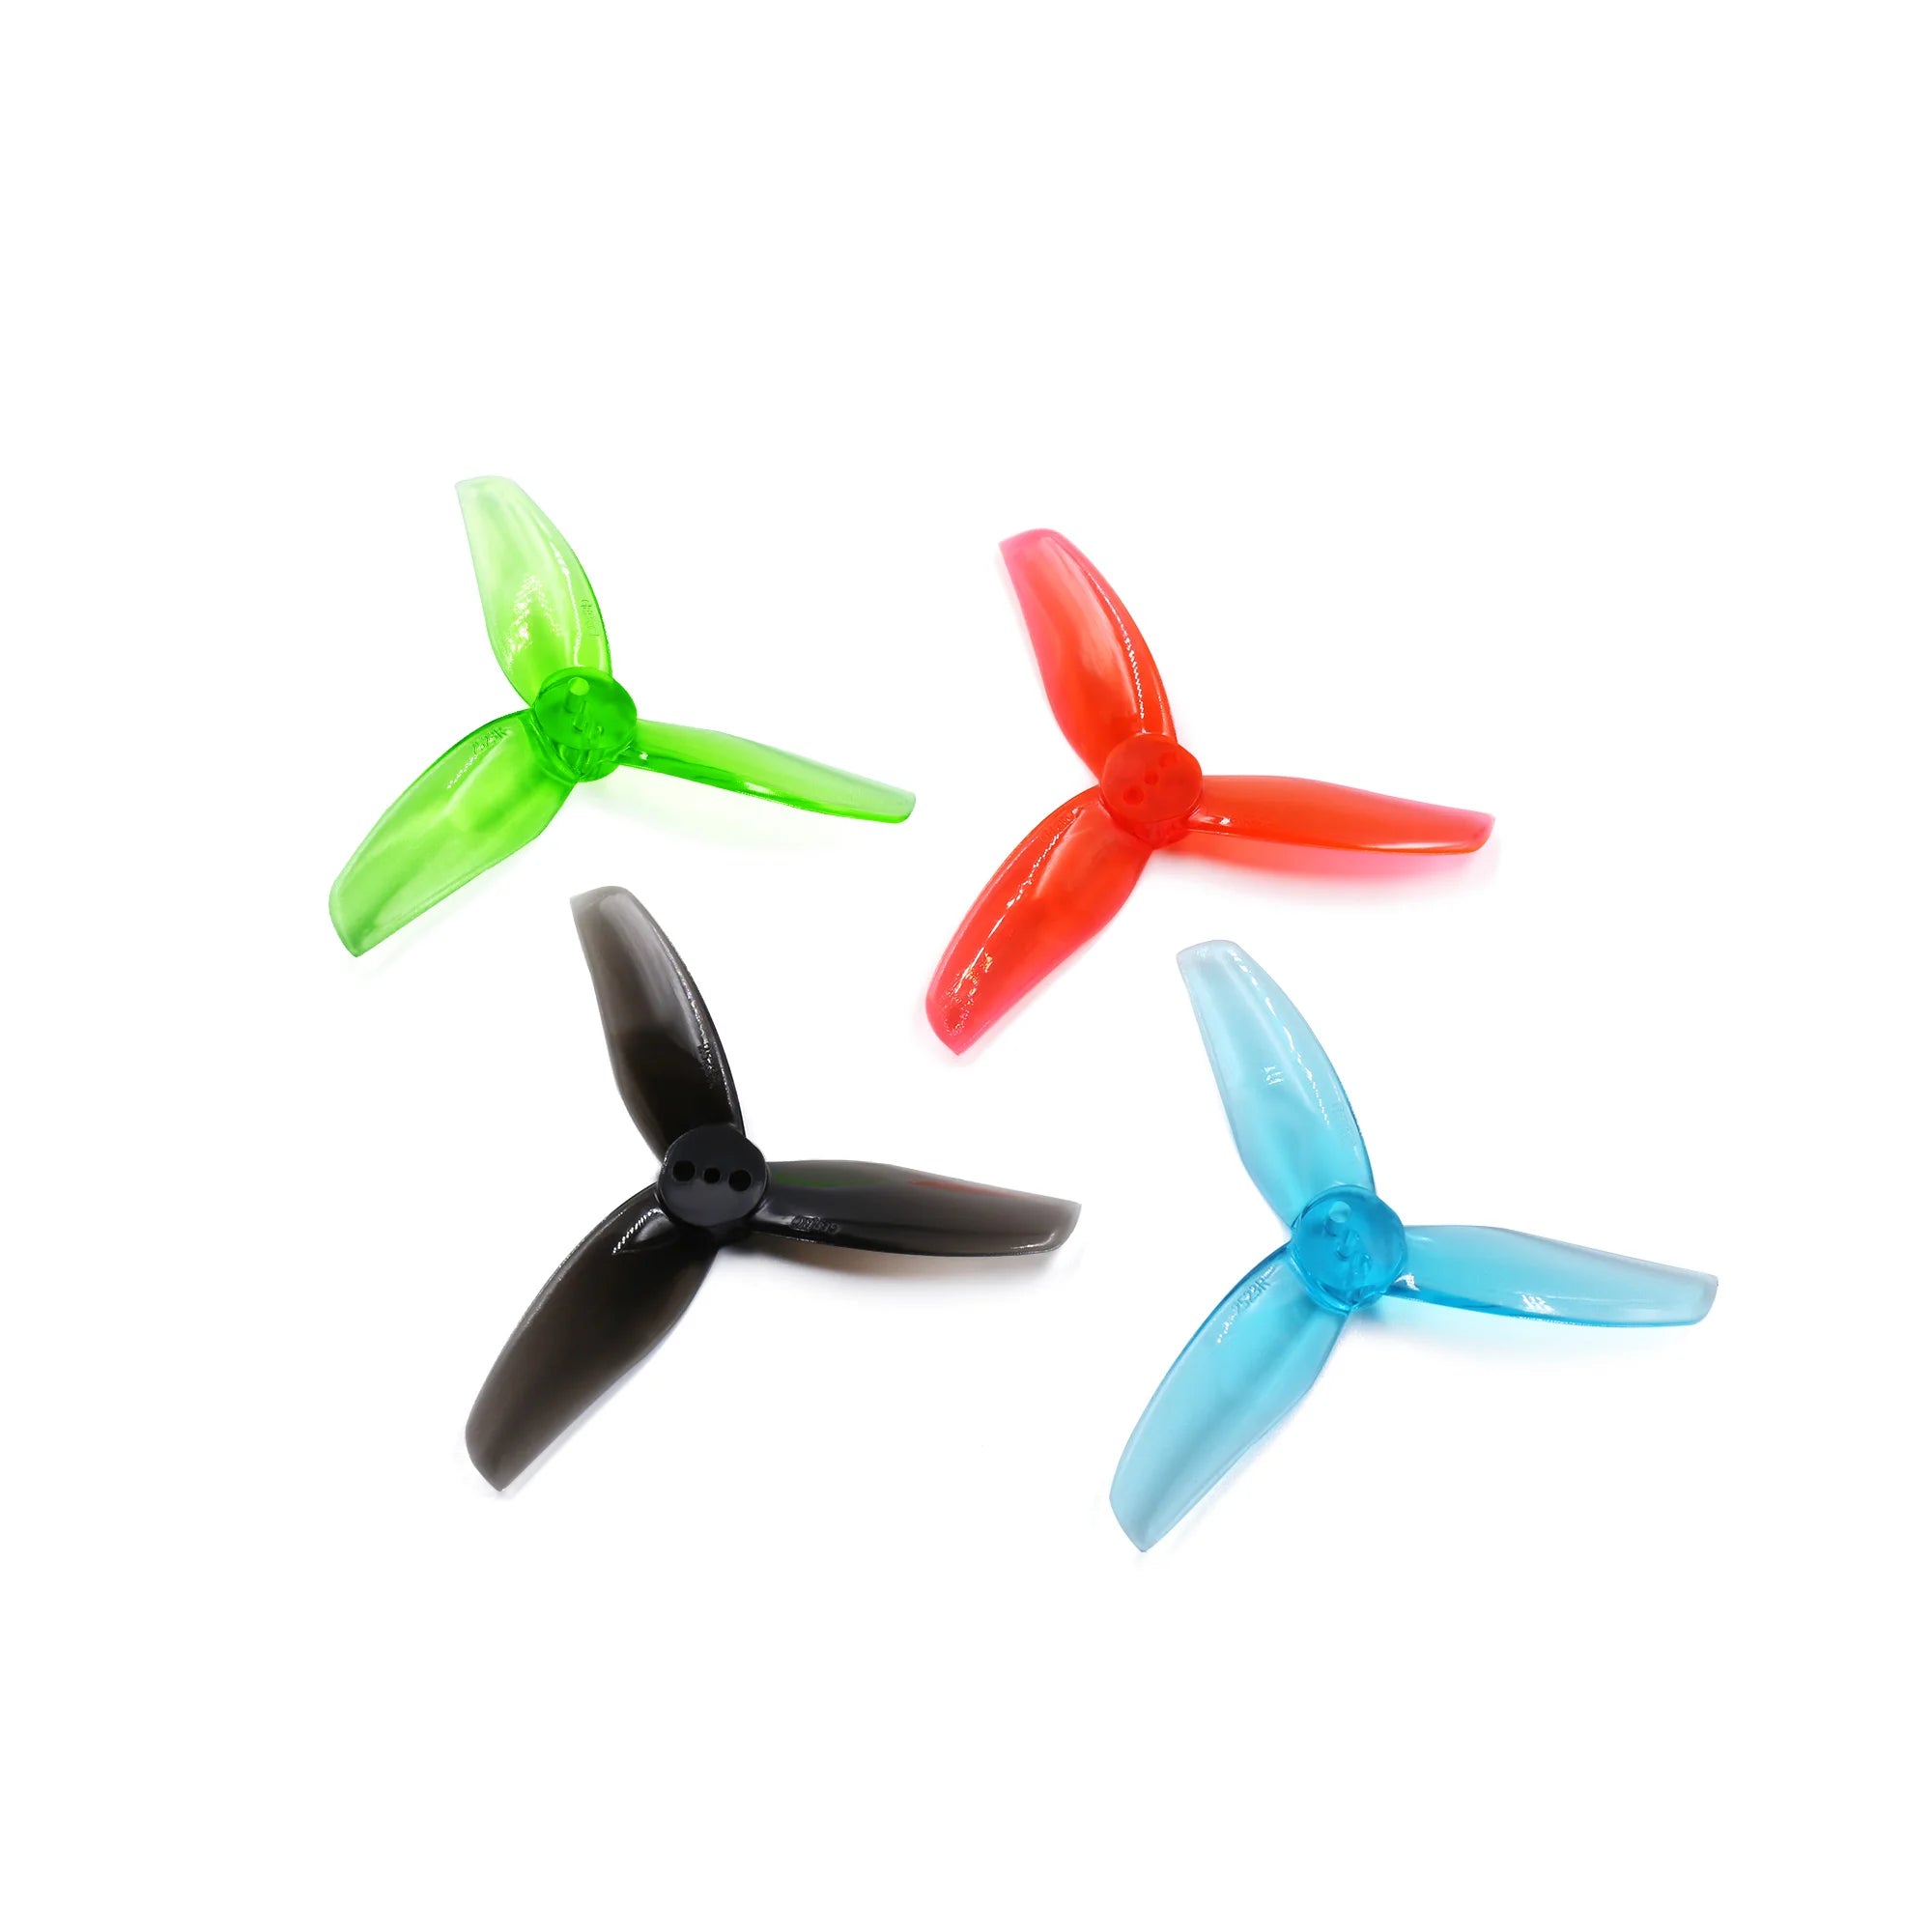 GEPRC G2523 Propeller, Large pulling force and linear throttle make it suitable for Racing and Freestyle